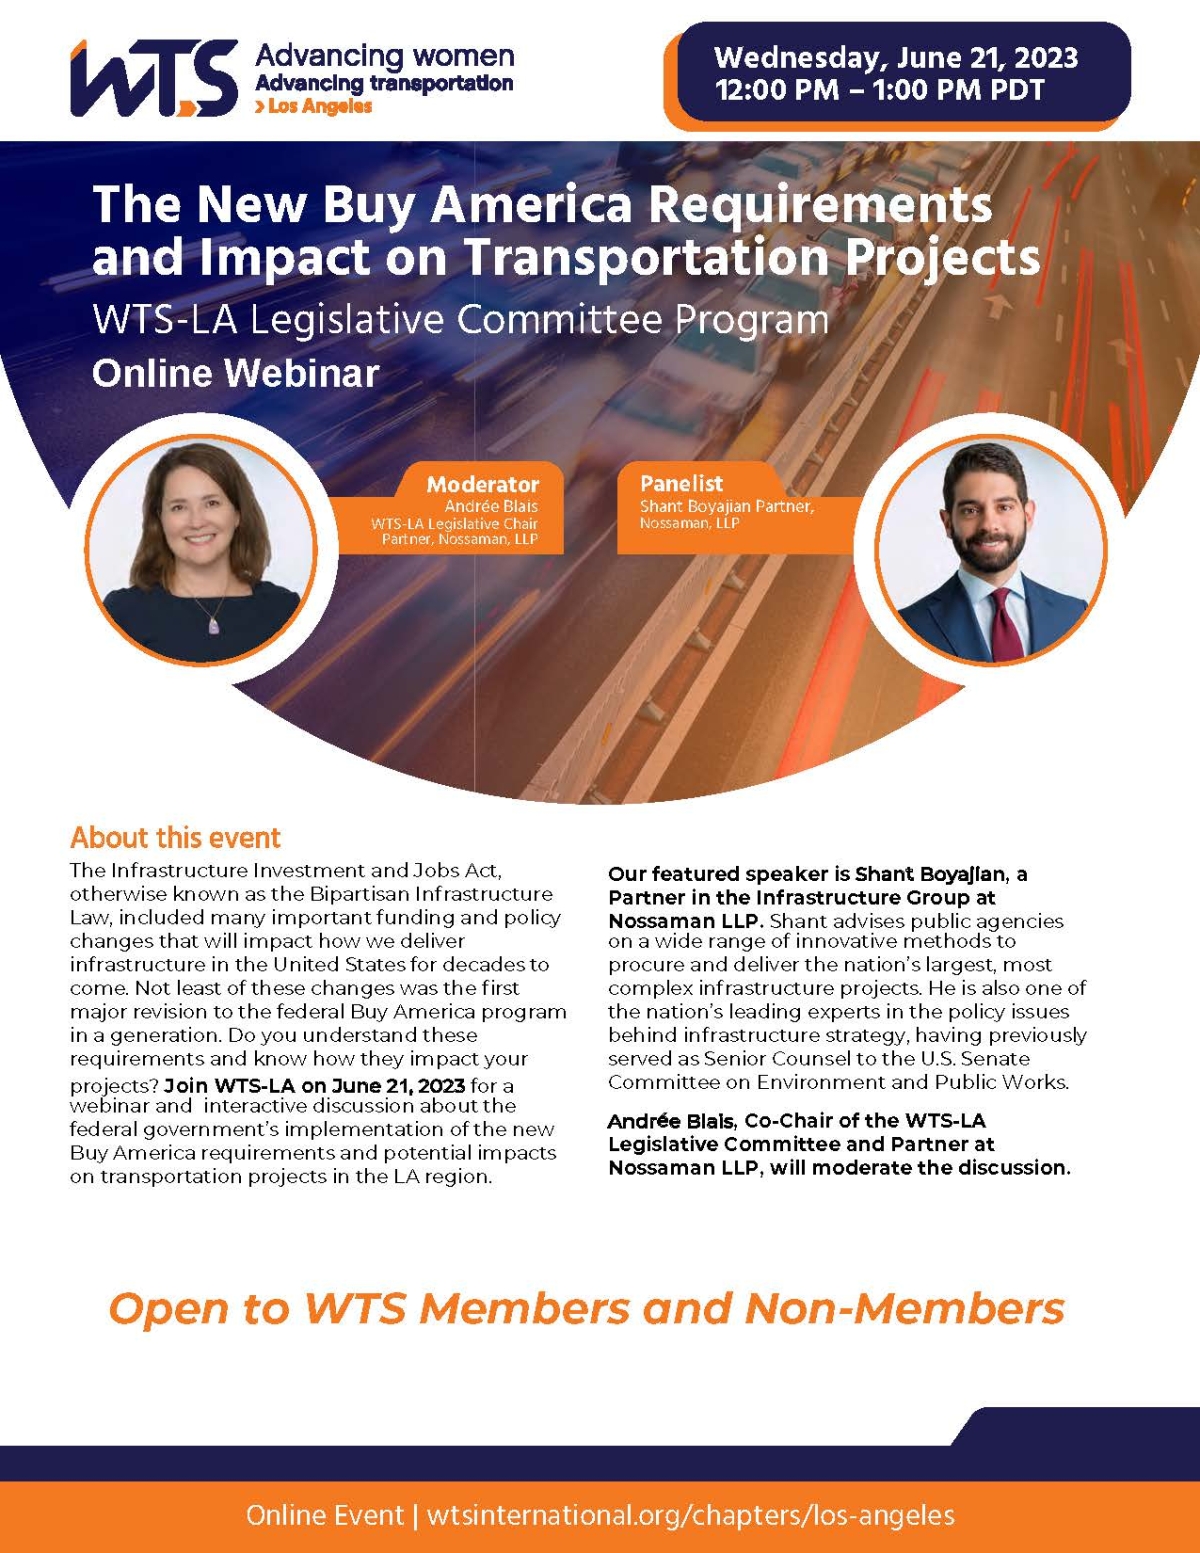 The New Buy American Requirements Webinar